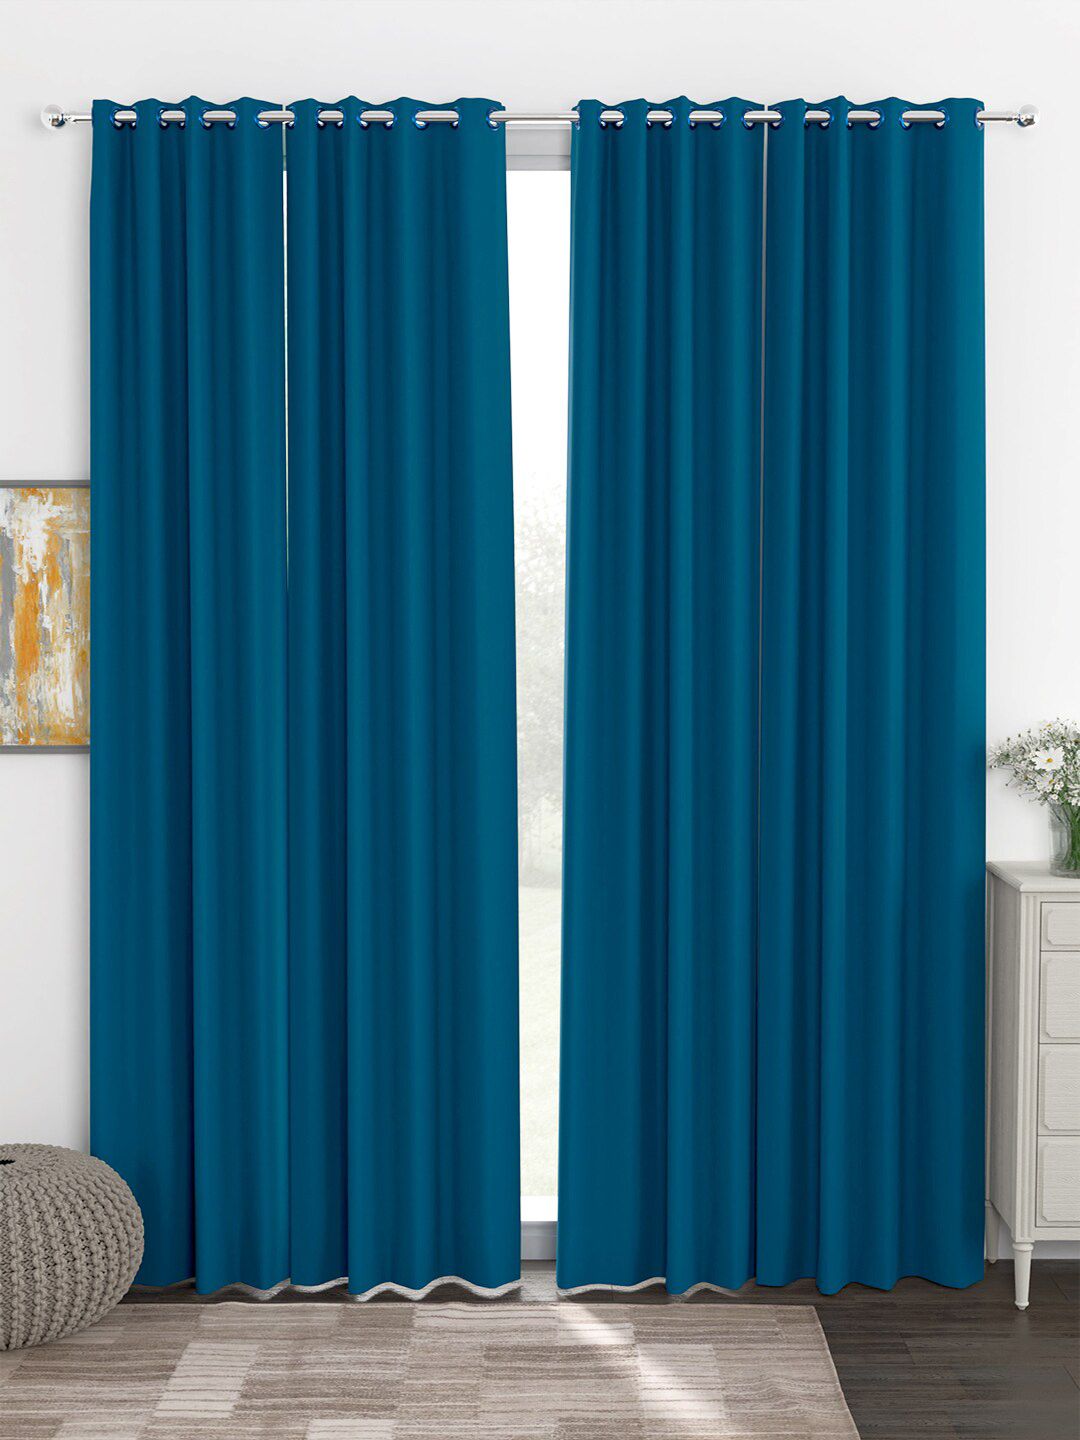 Story@home Navy Blue Set of 4 Black Out Door Curtain Price in India